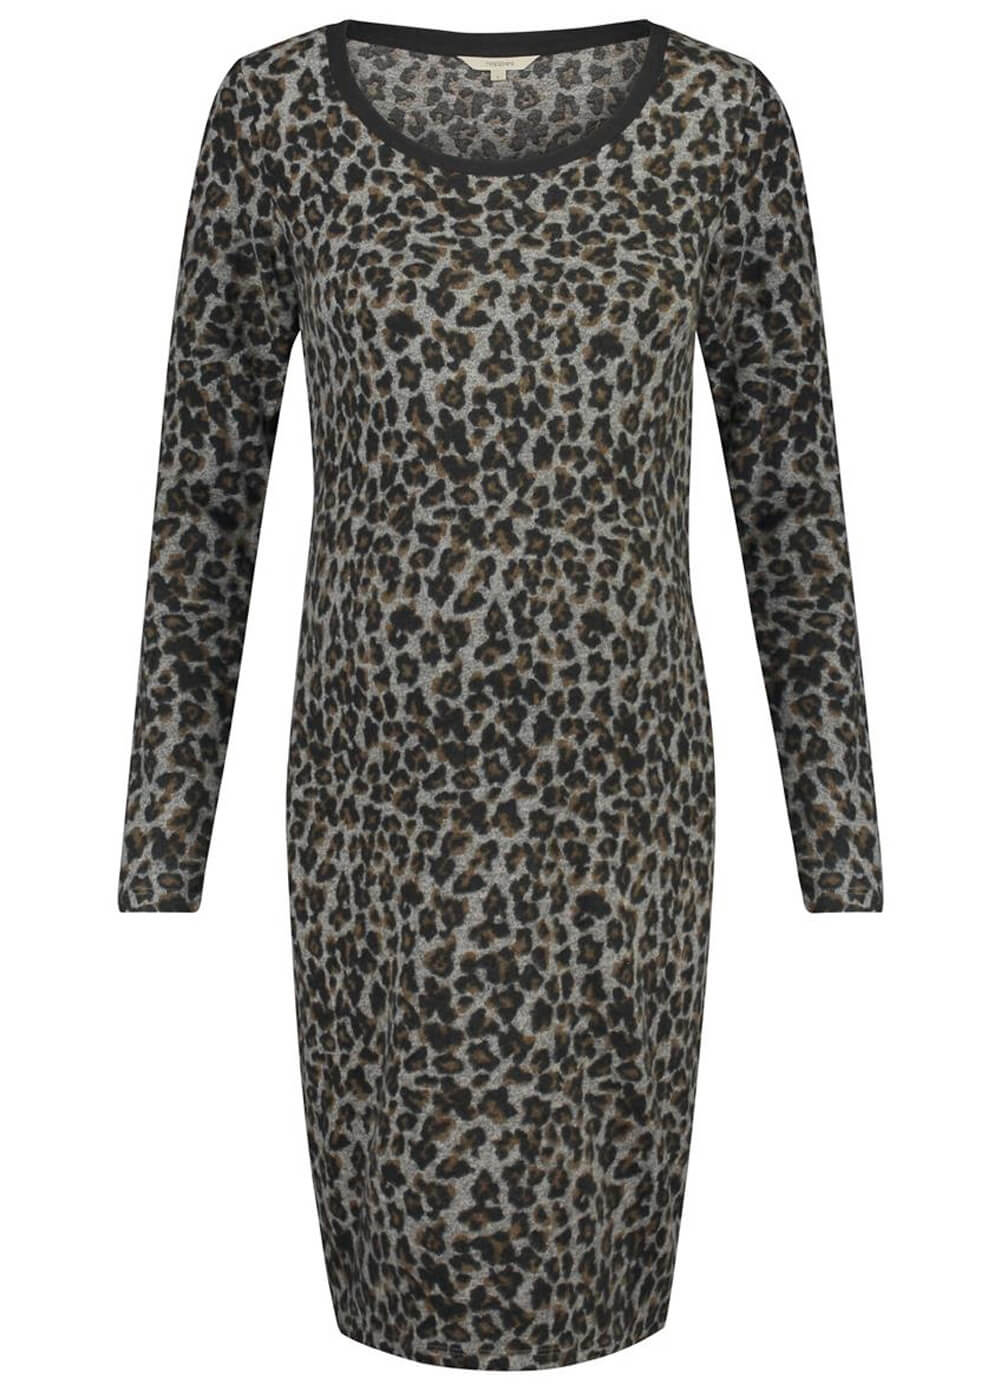 Grey Leopard Print Maternity Dress by Noppies